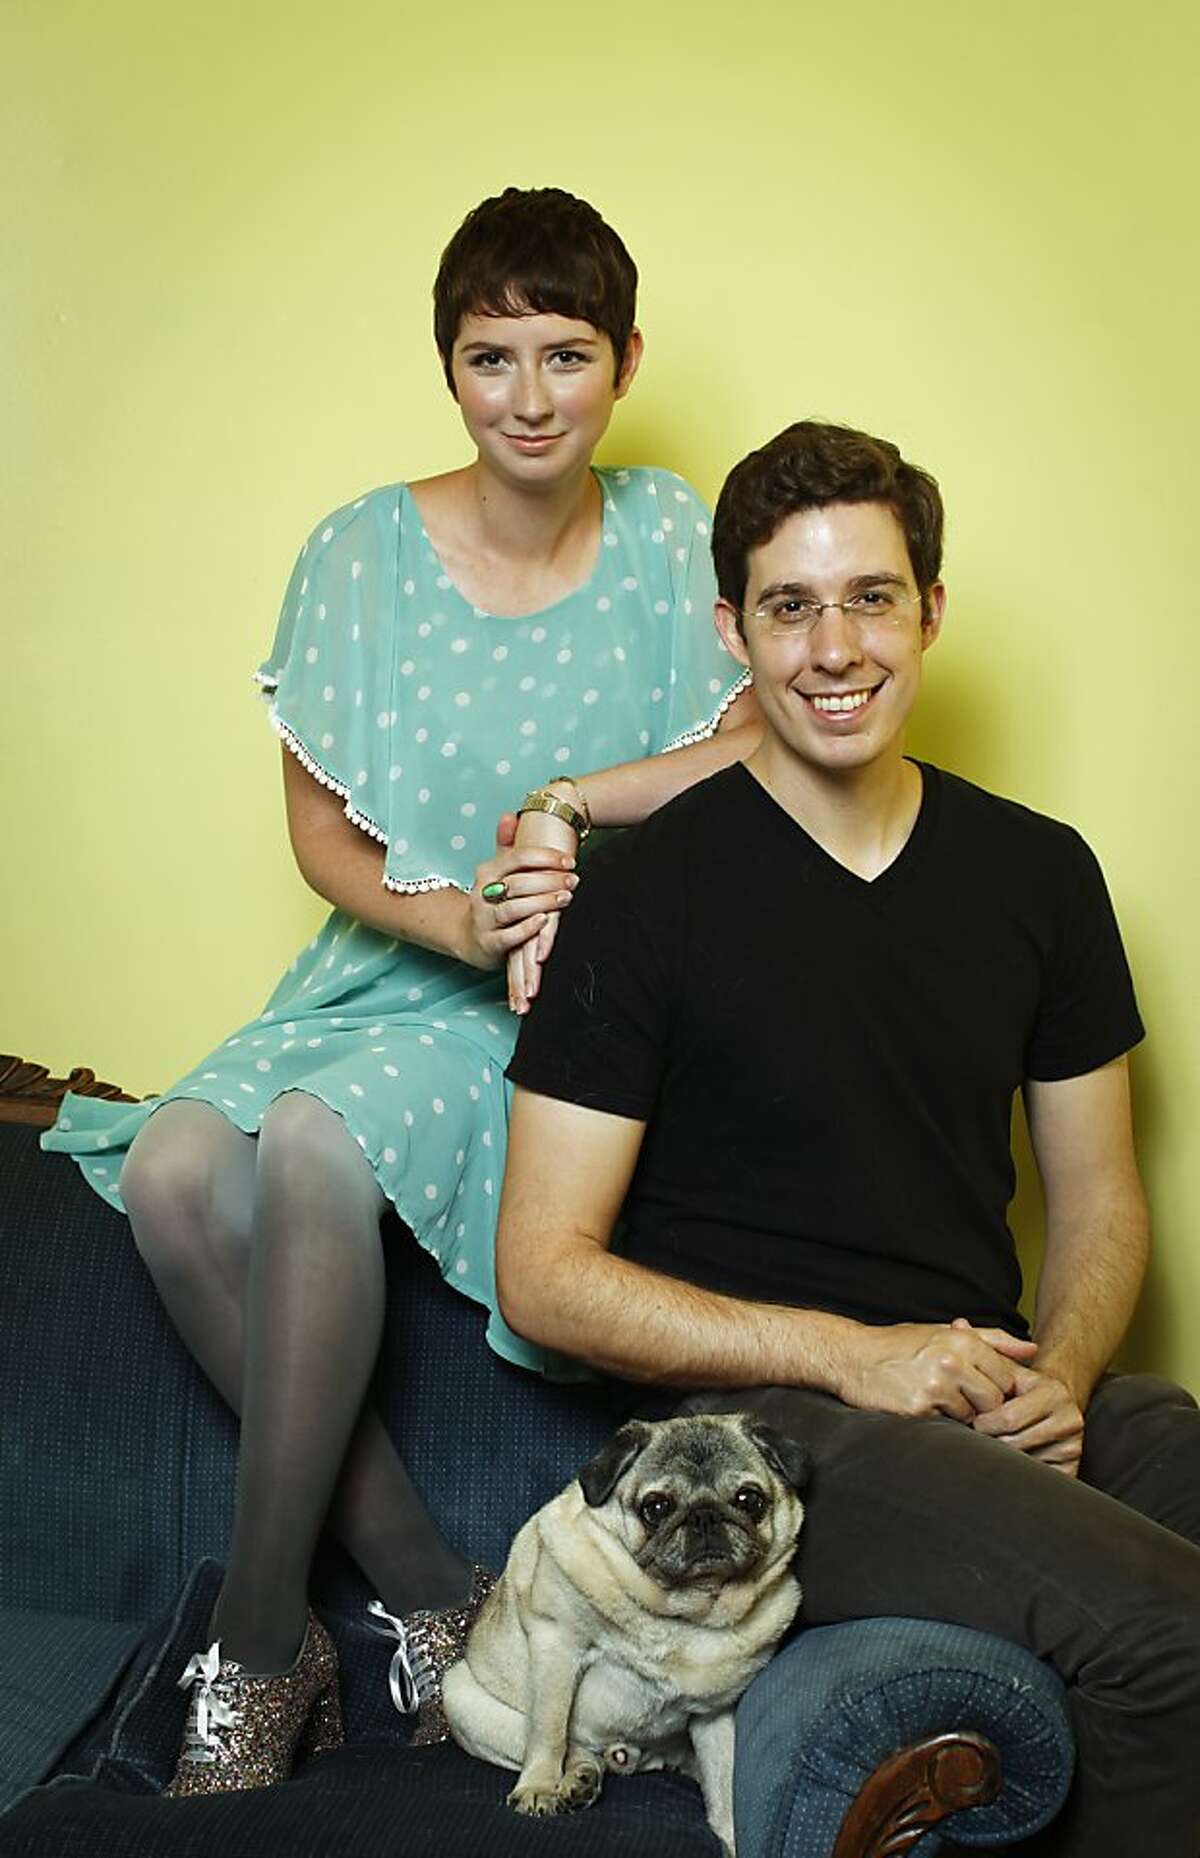 Susan and Eric Koger, founders of Modcloth, are seen with their dog, Winston, in their San Francisco, Calif., office on Tuesday, May 14, 2013.